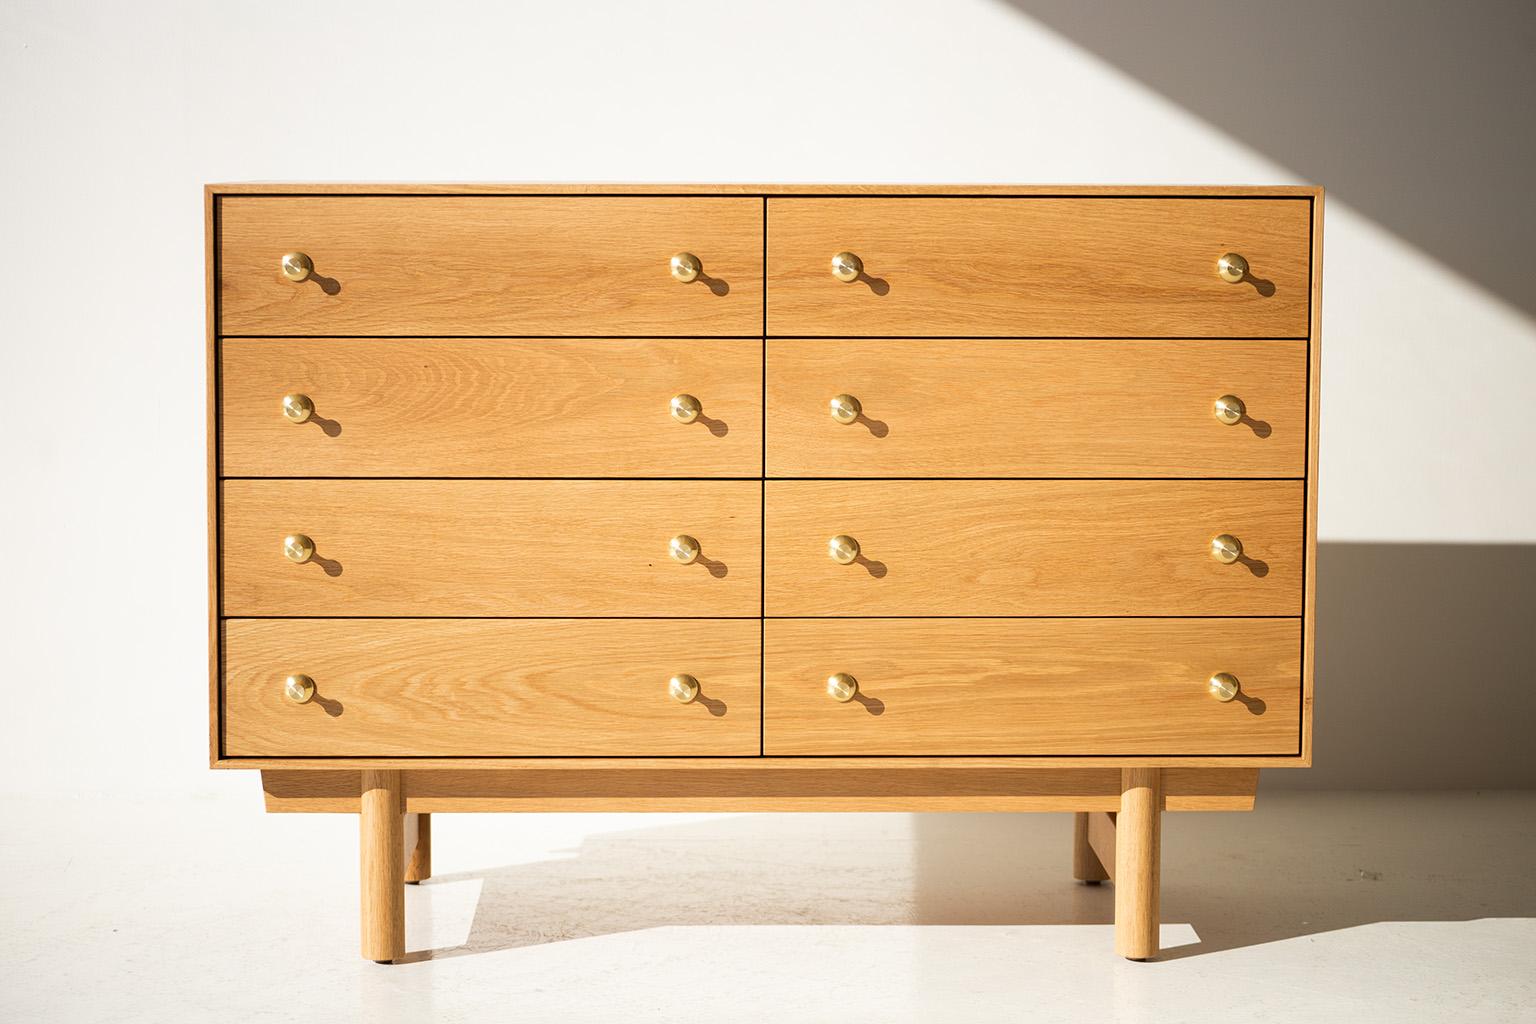 Lawrence Peabody Oak Dresser, 2201P, Craft Associates Furniture In New Condition For Sale In Oak Harbor, OH